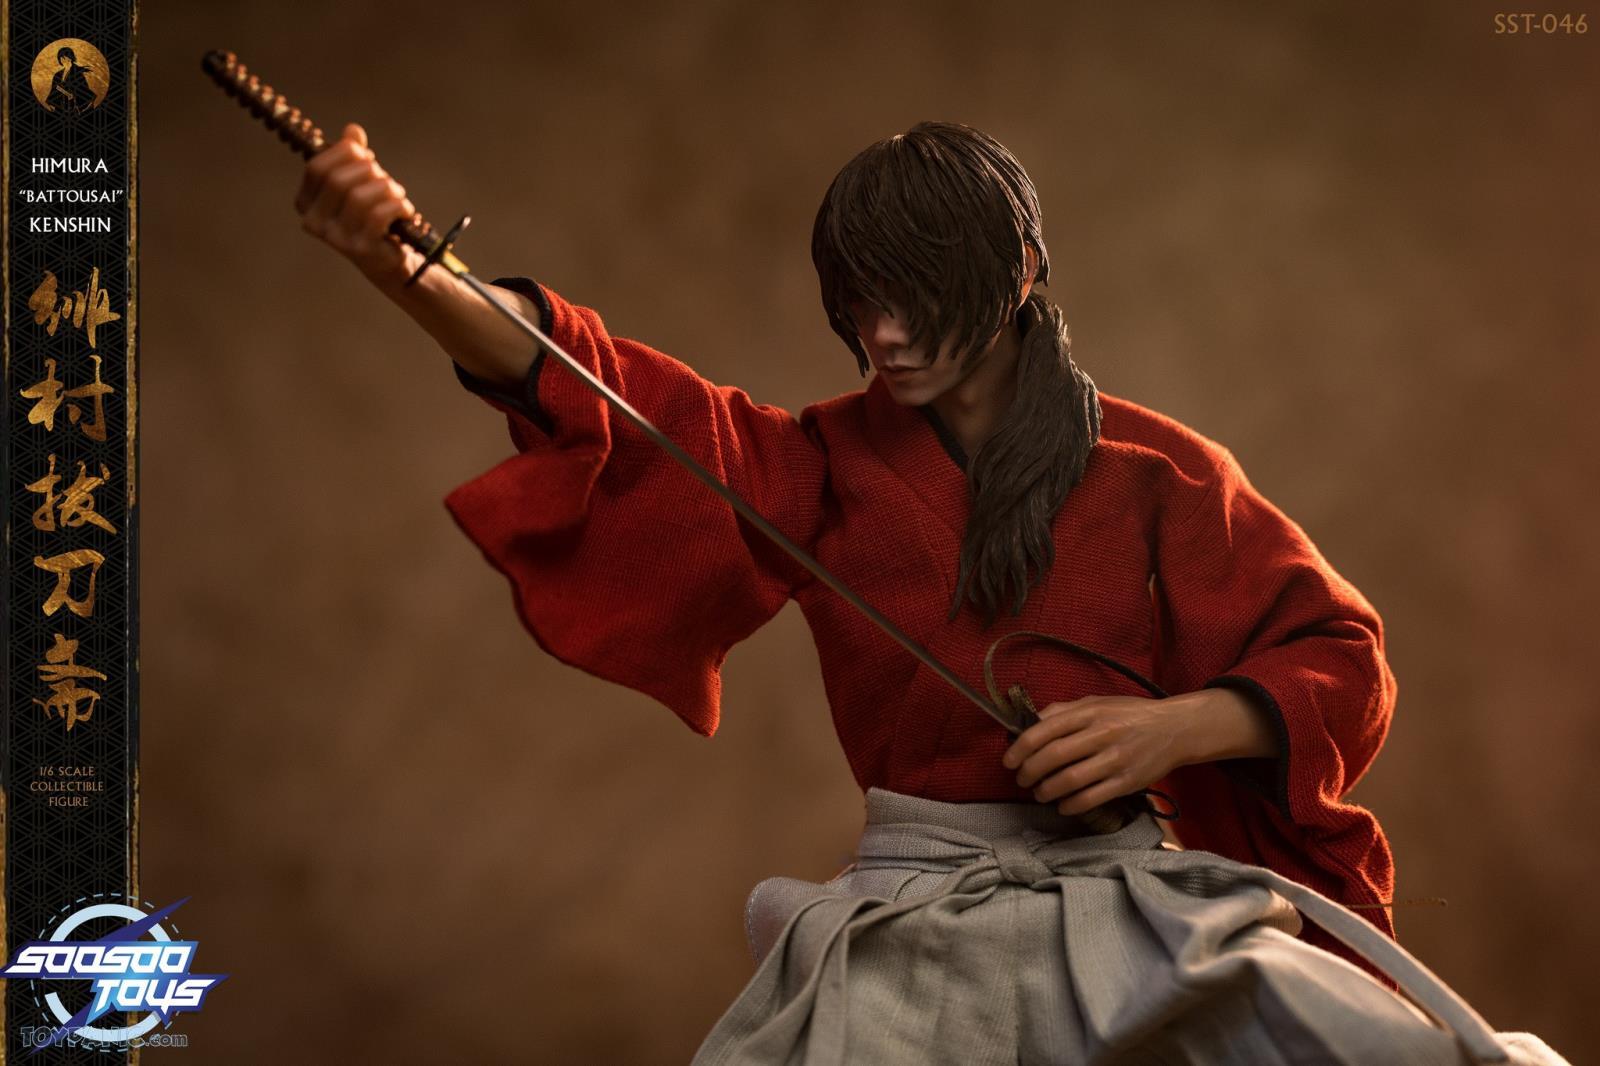 NEW PRODUCT: 1/6 scale Rurouni Kenshin Collectible Figure from SooSooToys 712202251229PM_4050307